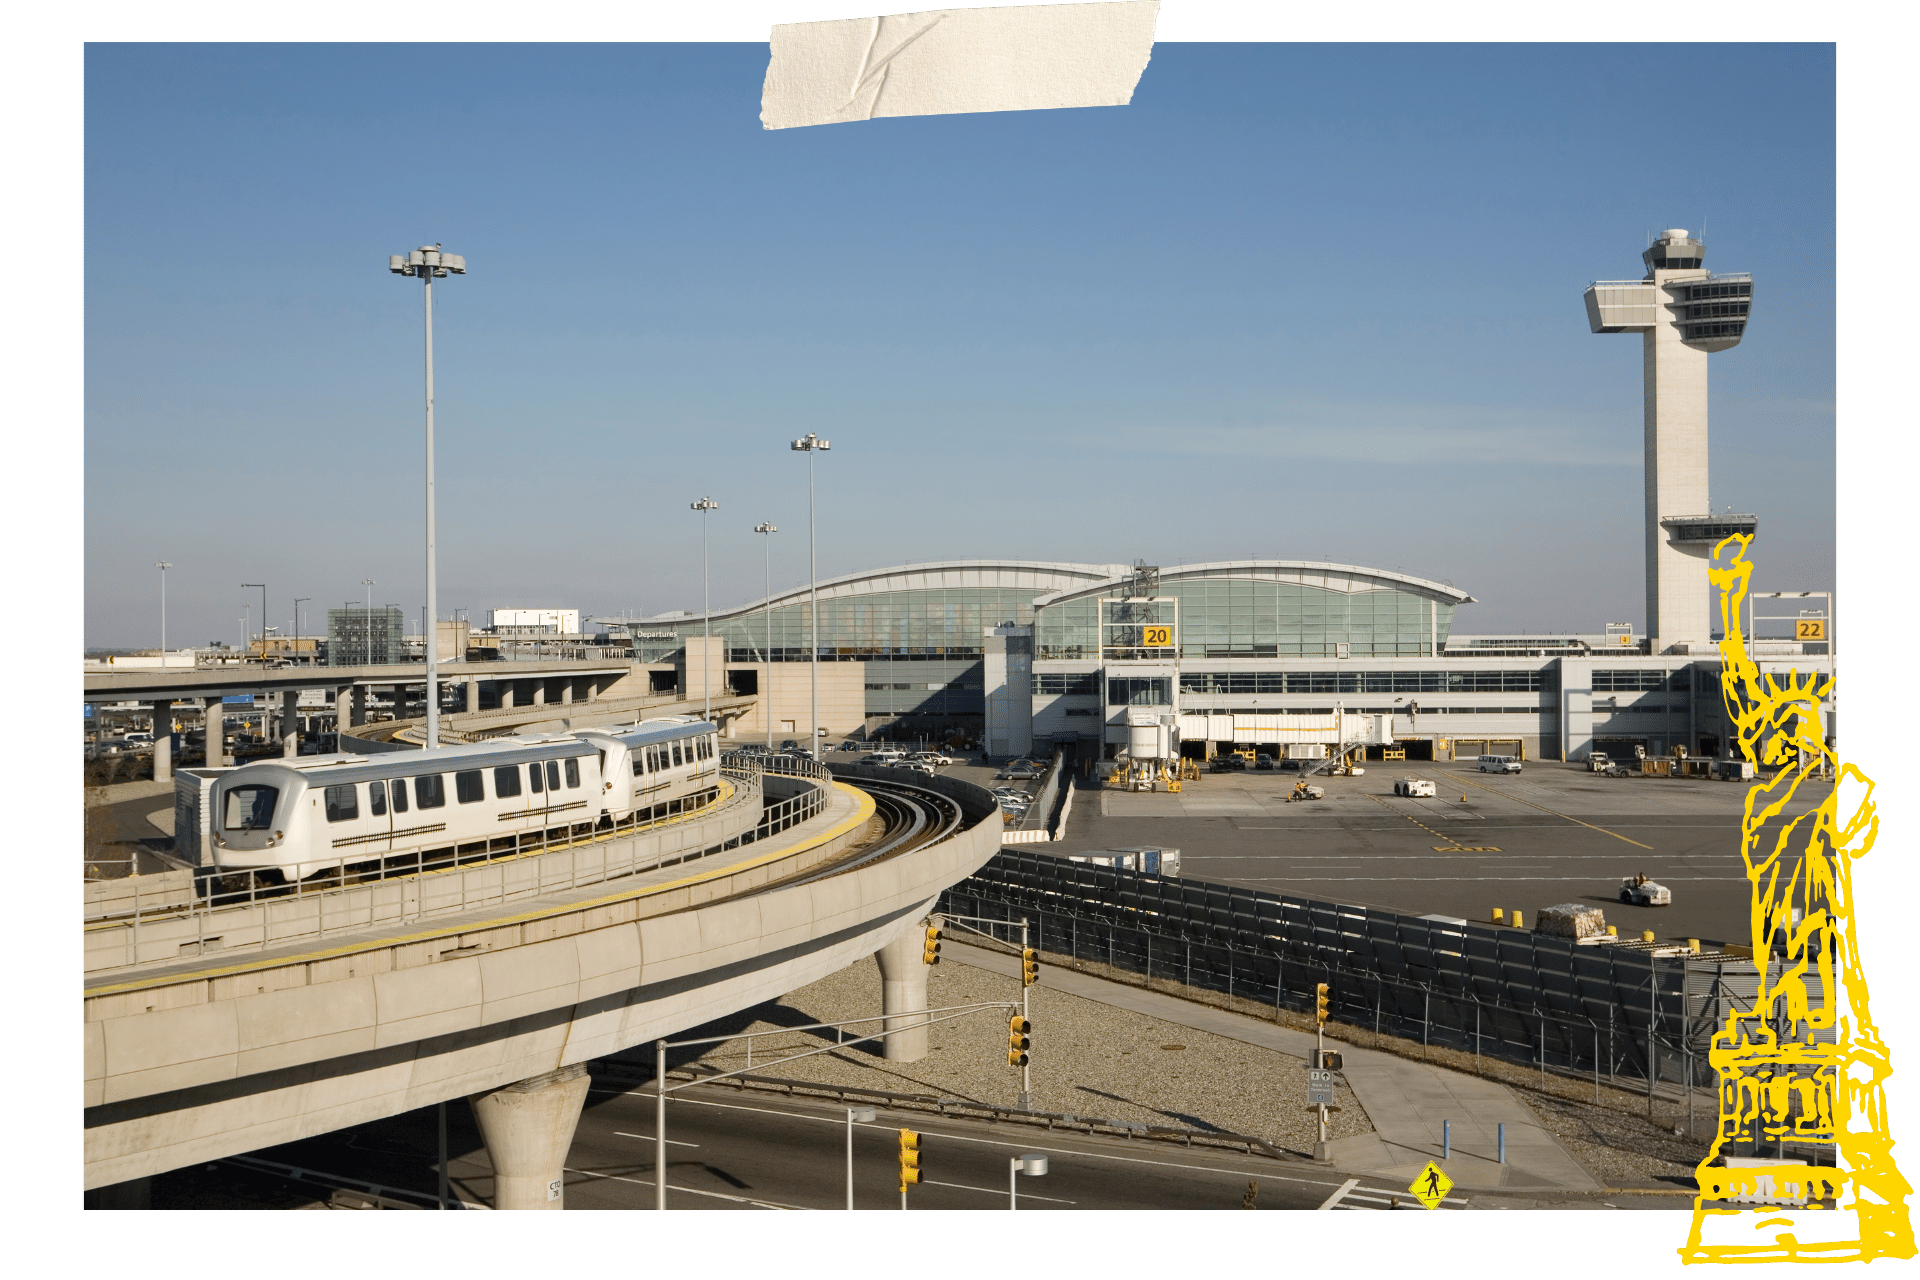 A picture of JFK International Airport, with a train headed away. If you're wondering how to get around New York for less money? Use public transport to get to and from the airport instead of a taxi.